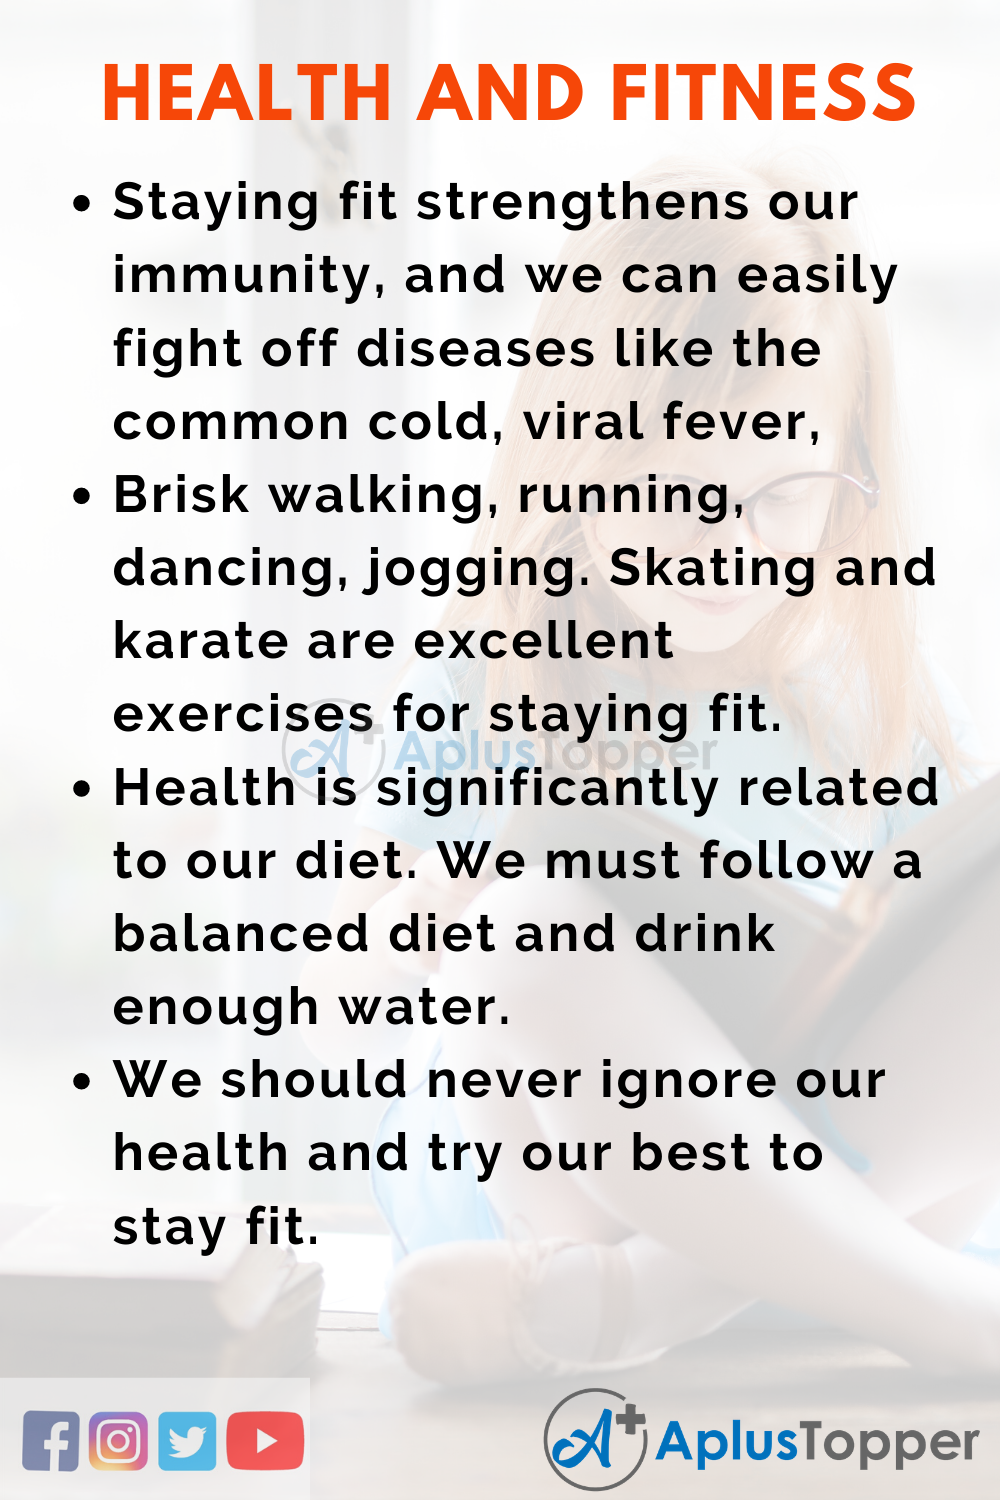 Tips to become healthy and fit